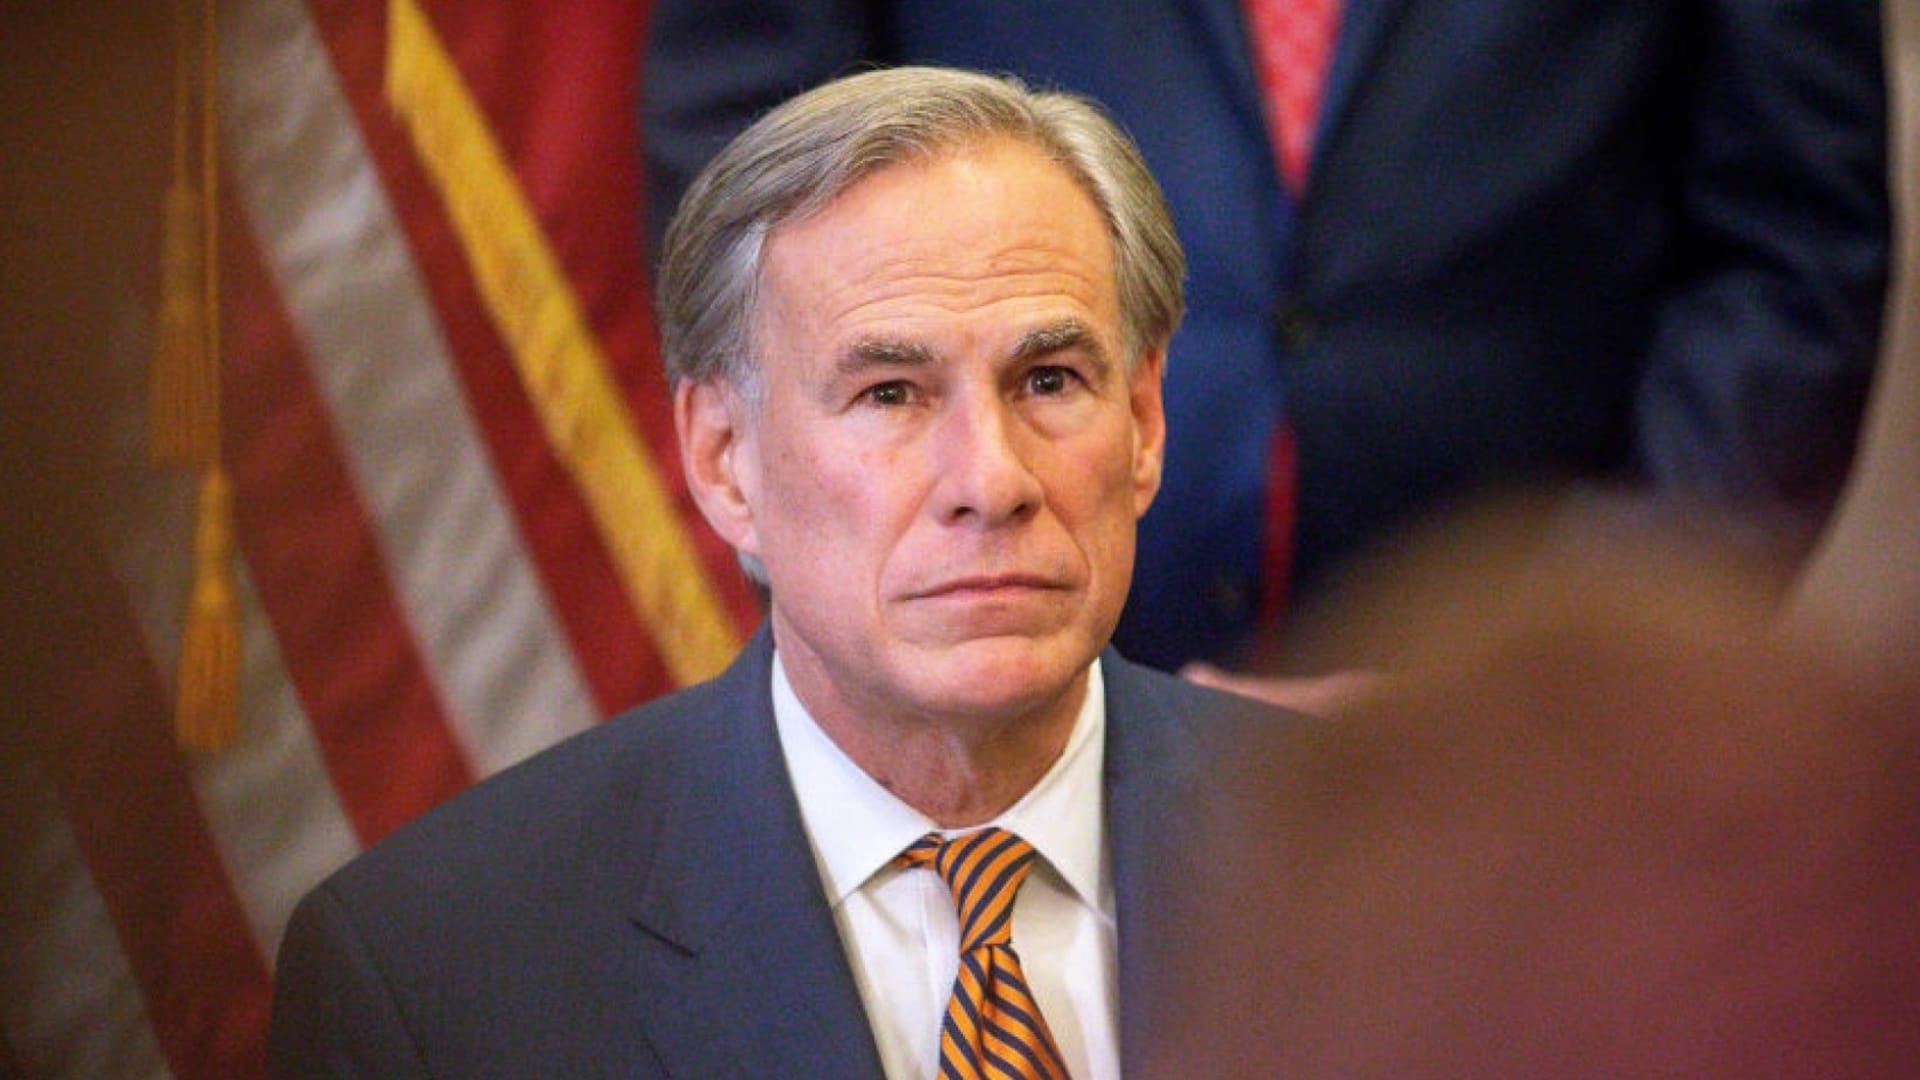 Why the Texas Governor's Ban on Vaccine Mandates Could Be a Huge Headache for Business Owners